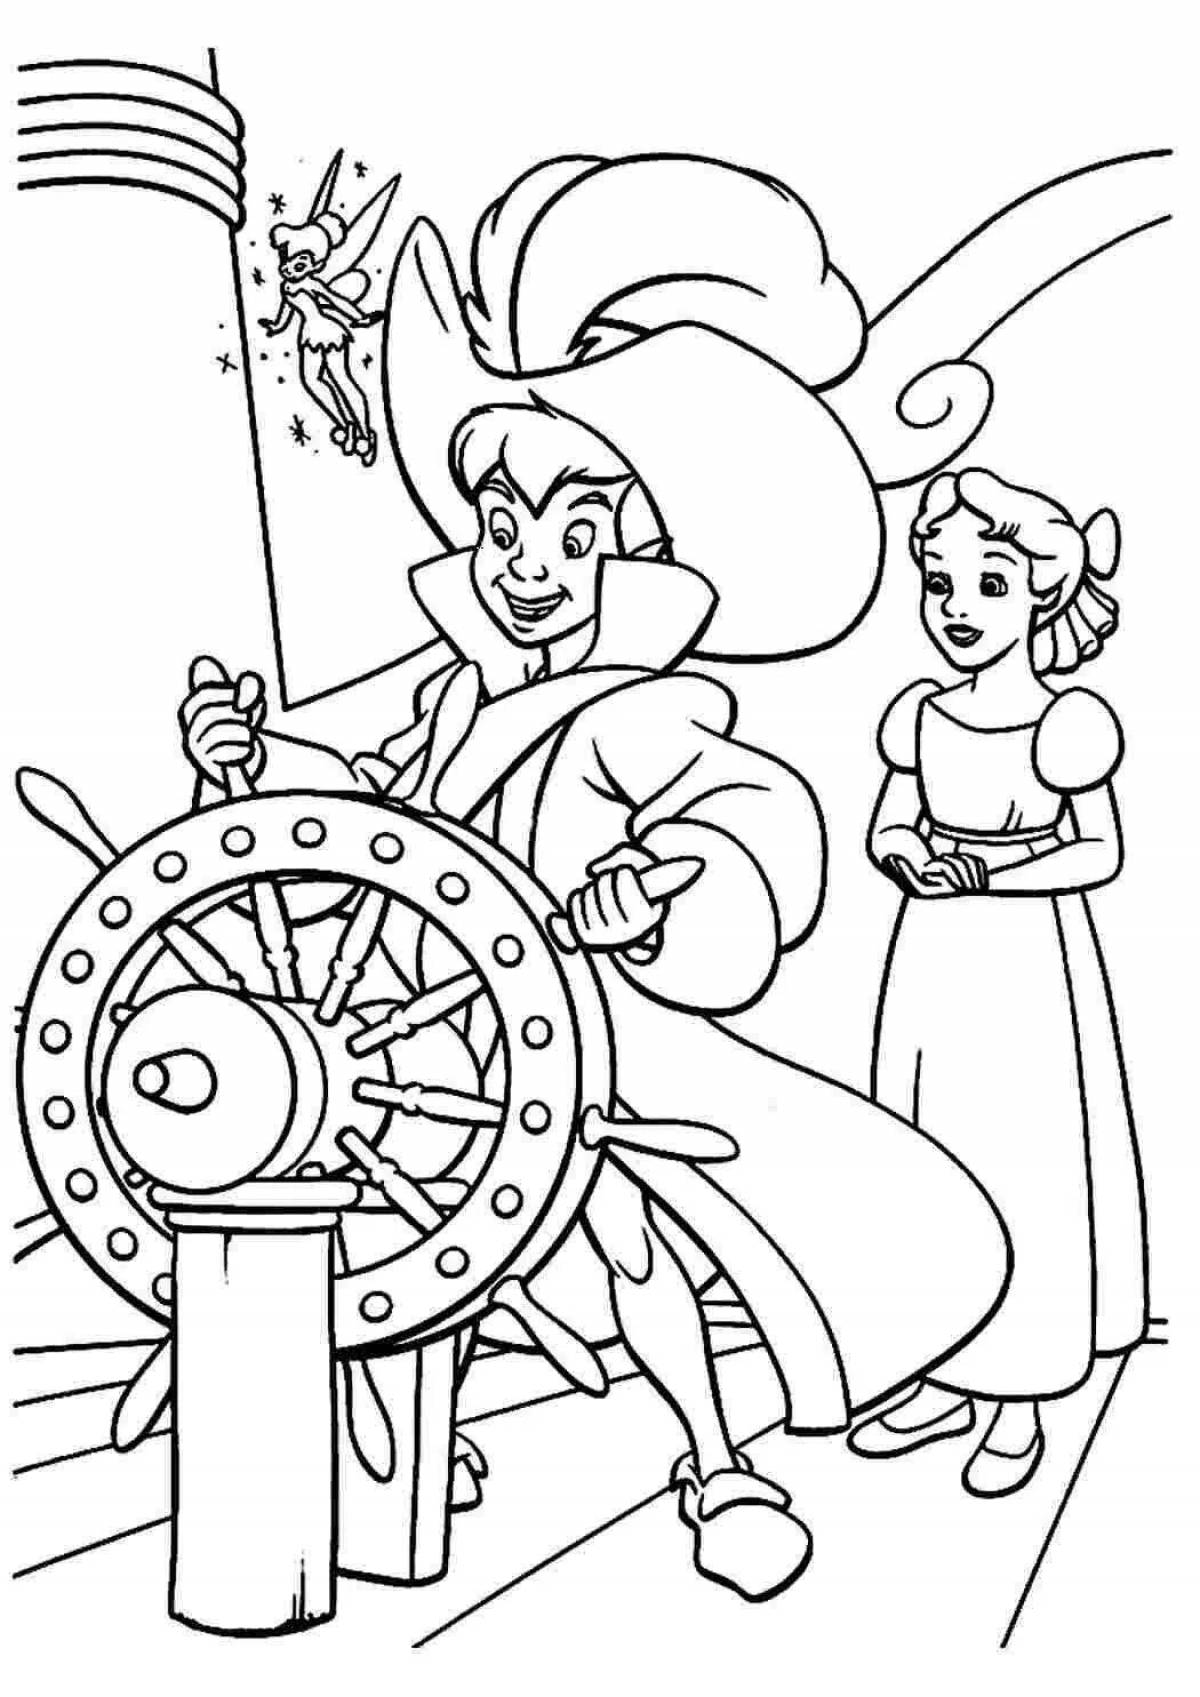 Coloring book noble captain of the ship